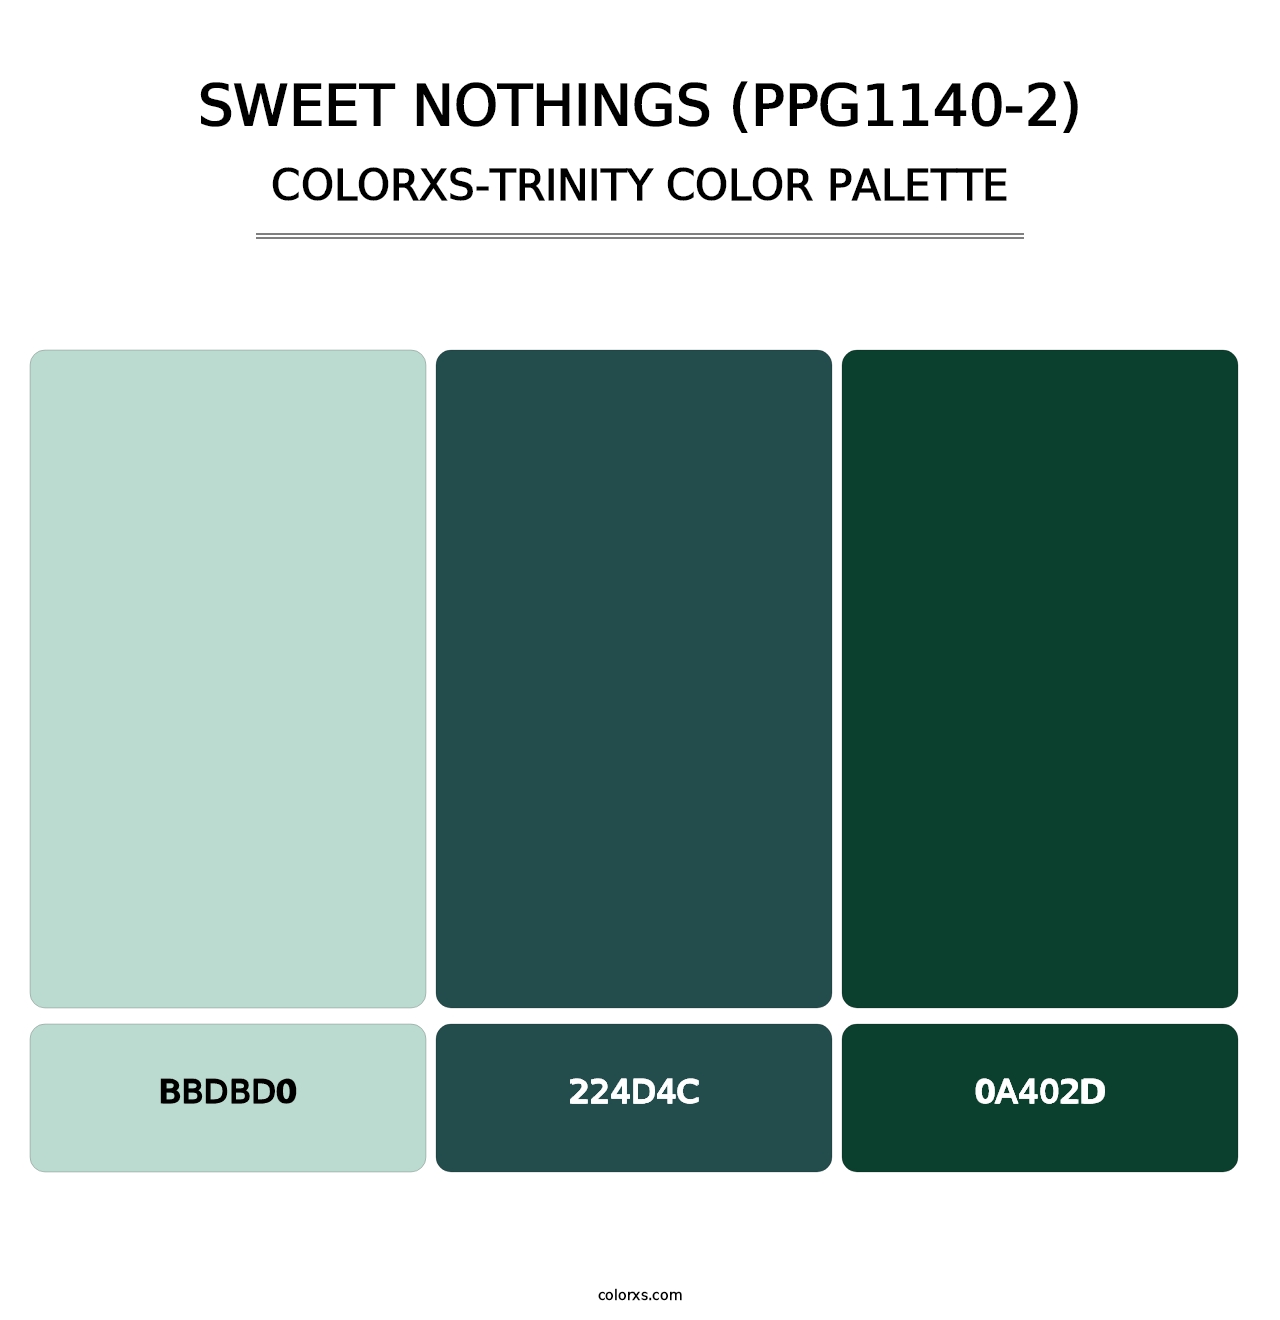 Sweet Nothings (PPG1140-2) - Colorxs Trinity Palette